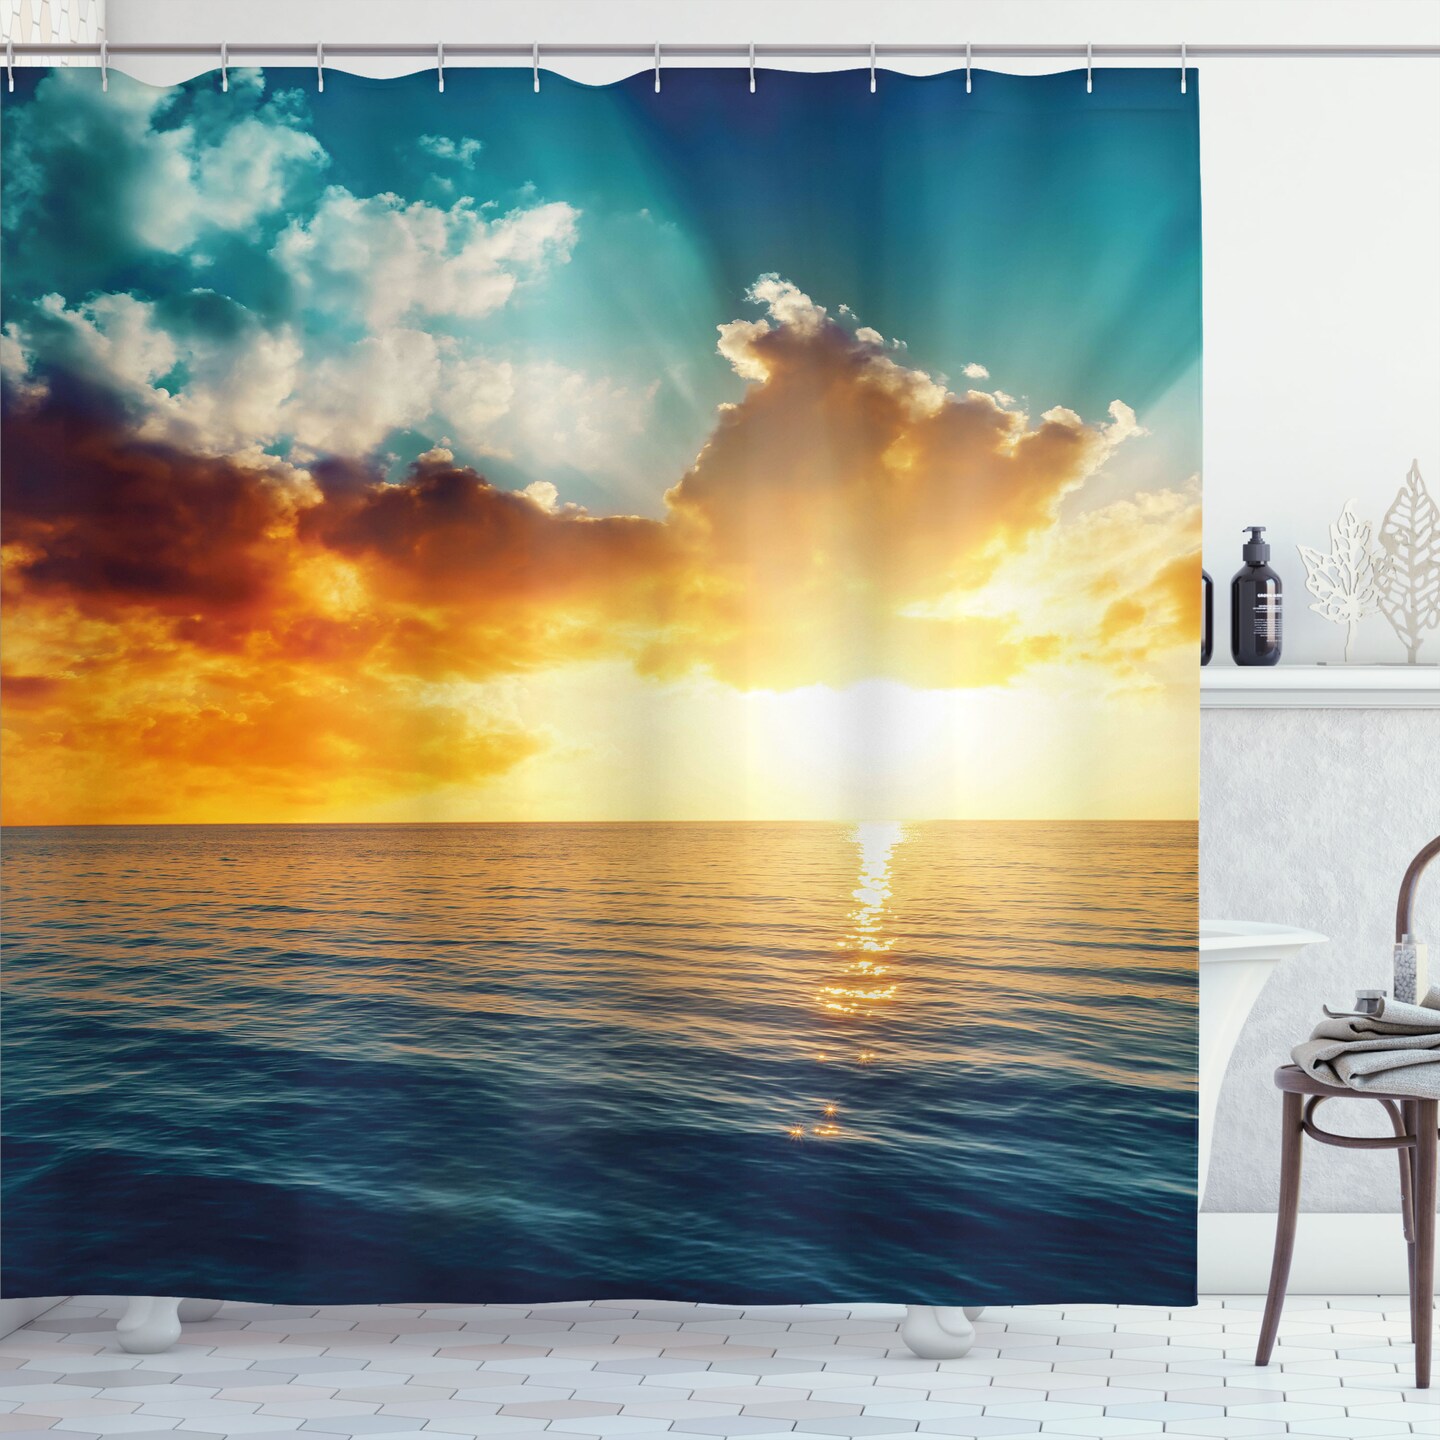 Ambesonne Ocean Shower Curtain, Majestic Sunset Over The Sea Scenic Idyllic  Aquatic View Morning Picture, Cloth Fabric Bathroom Decor Set with Hooks,  69 W x 70 L, Turquoise Orange Blue